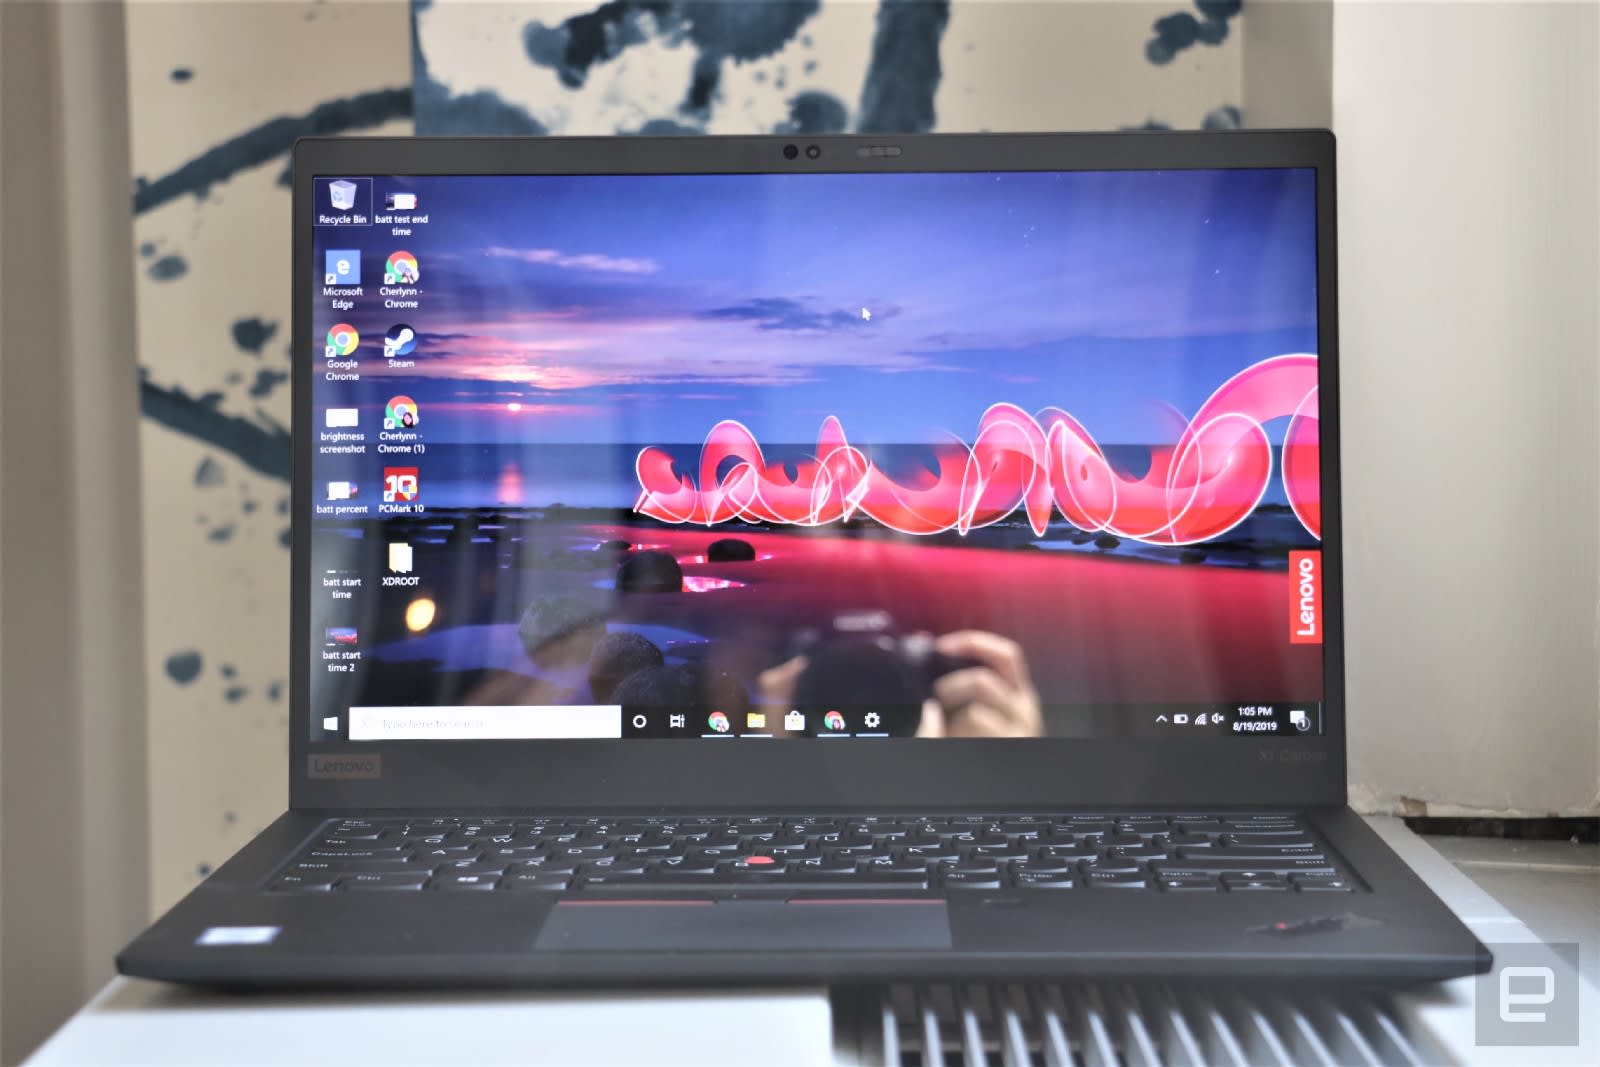 ThinkPad X1 Carbon review (2019): Sometimes it's good to be boring 